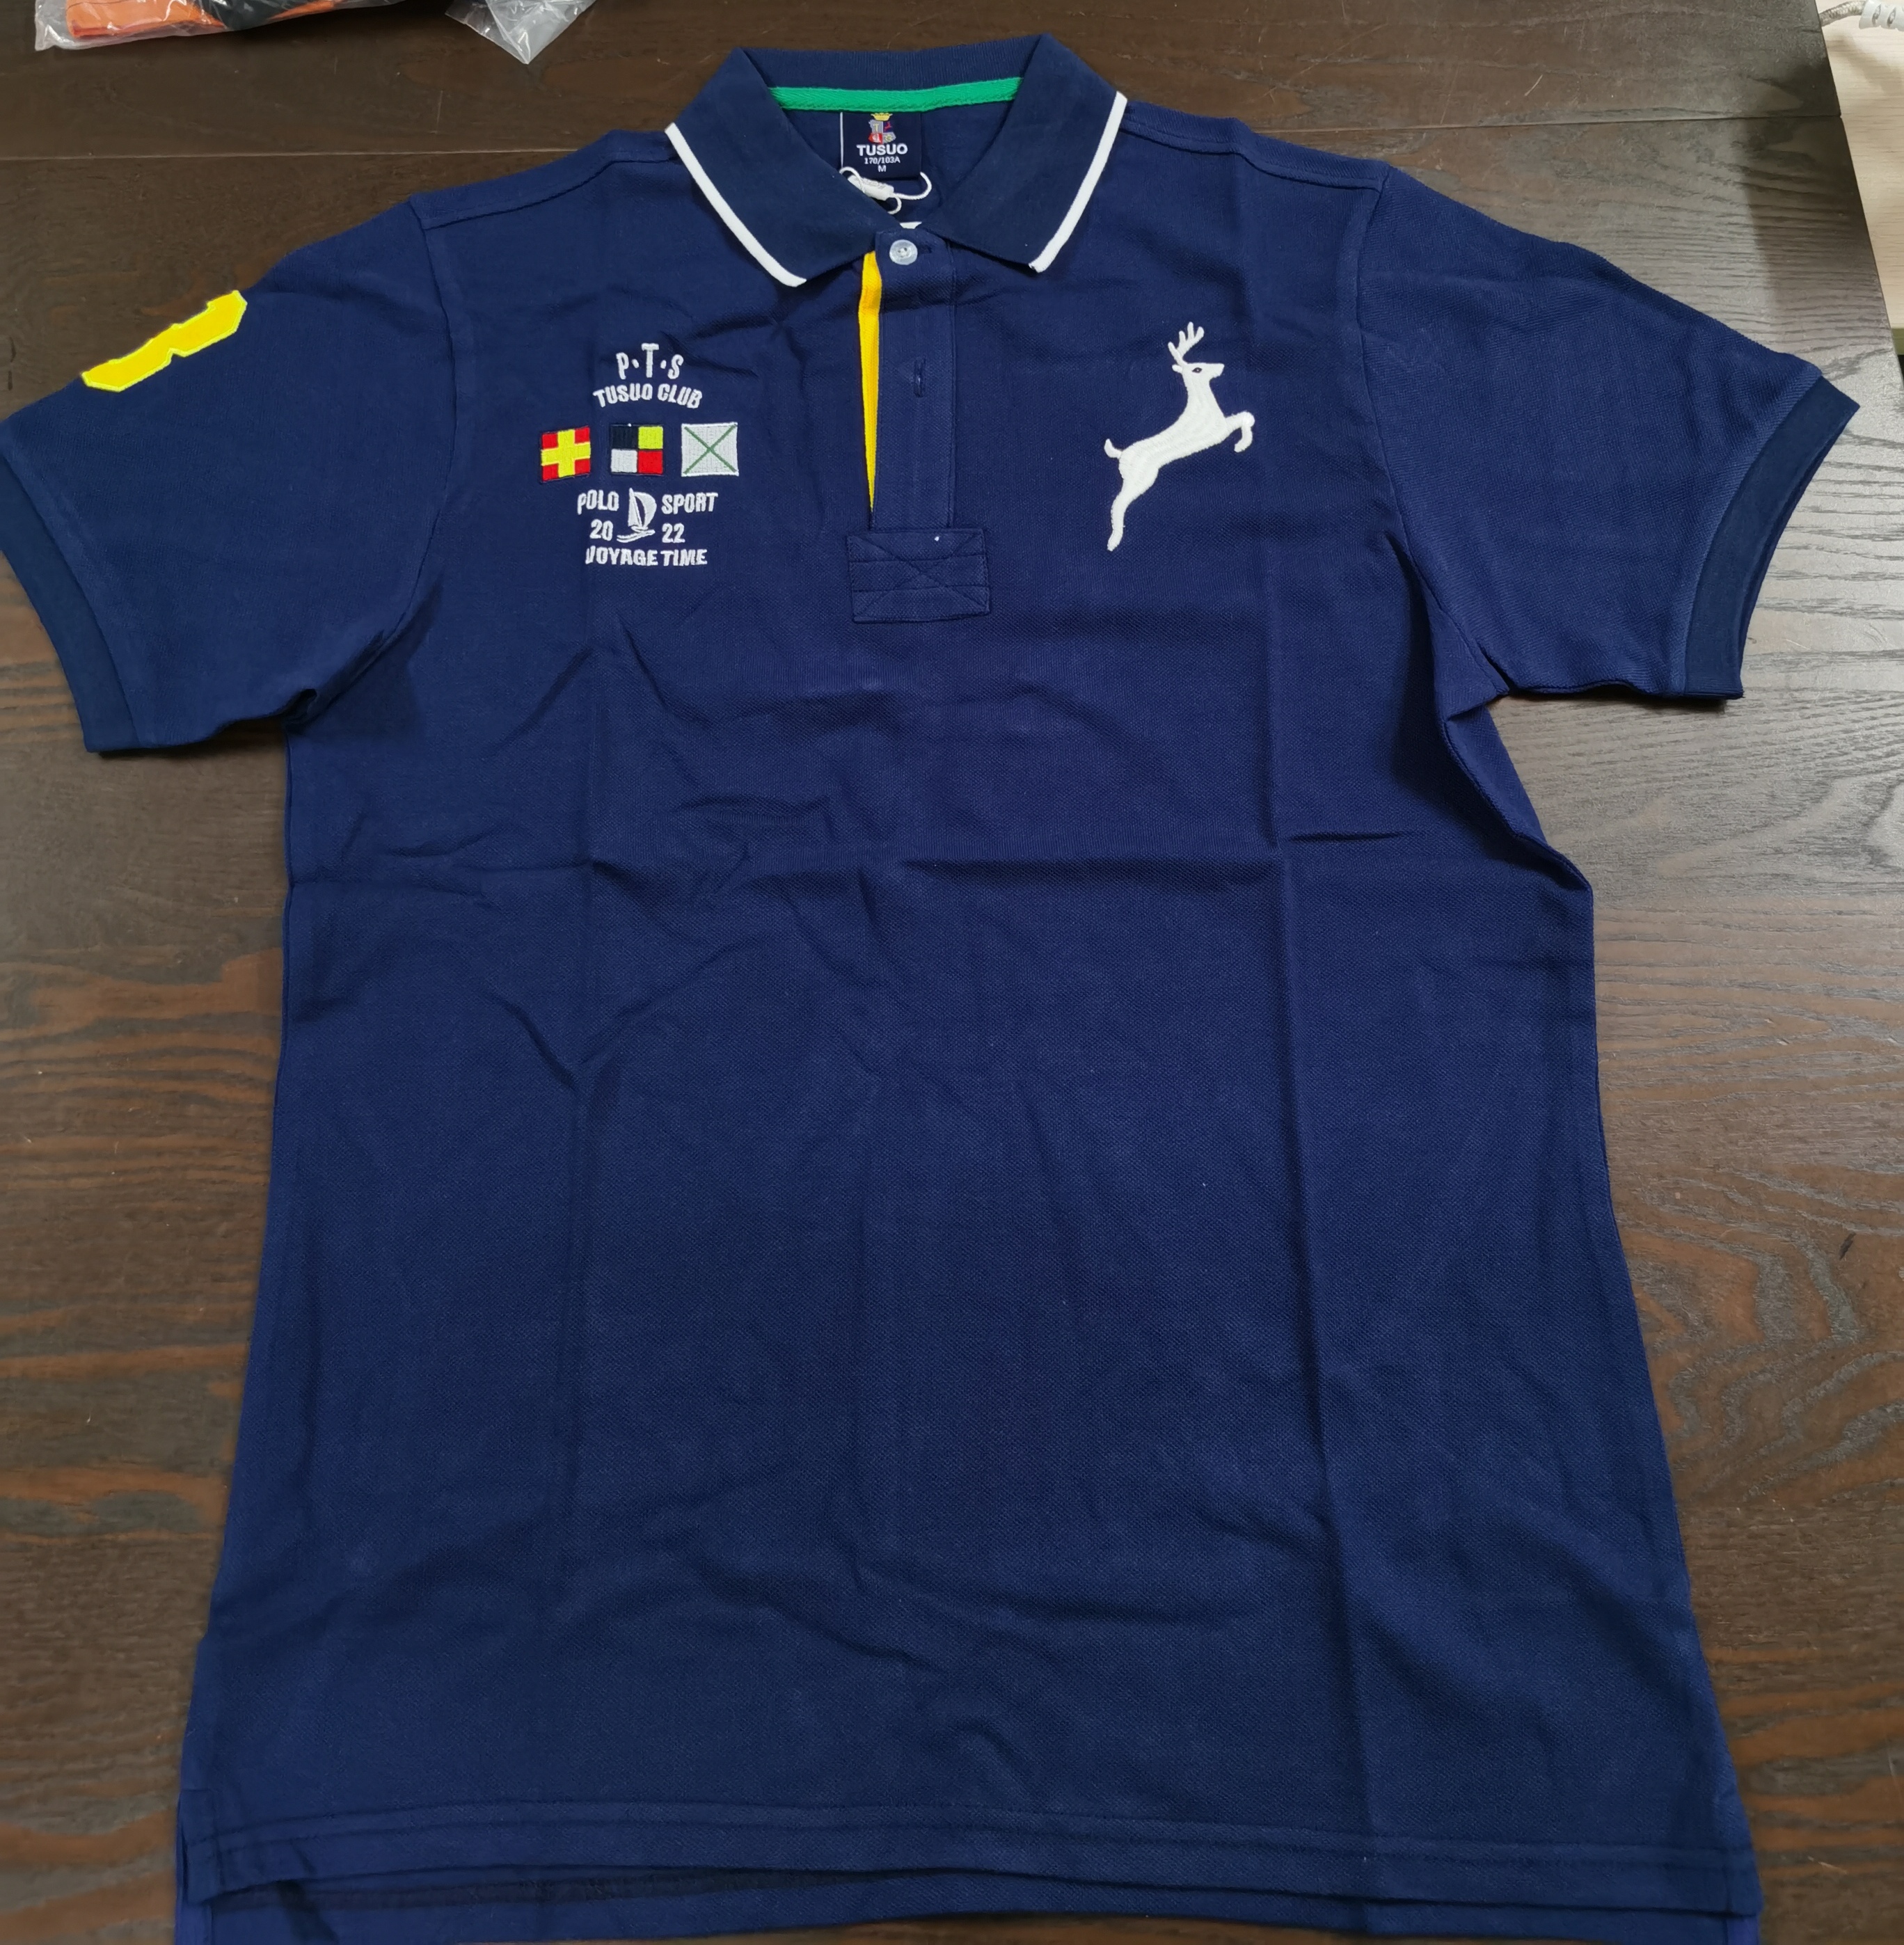 Brand New Summer Pure Cotton Men's Polo Shirt with Turn-down Collar Embroidery Design, Stylish and Casual